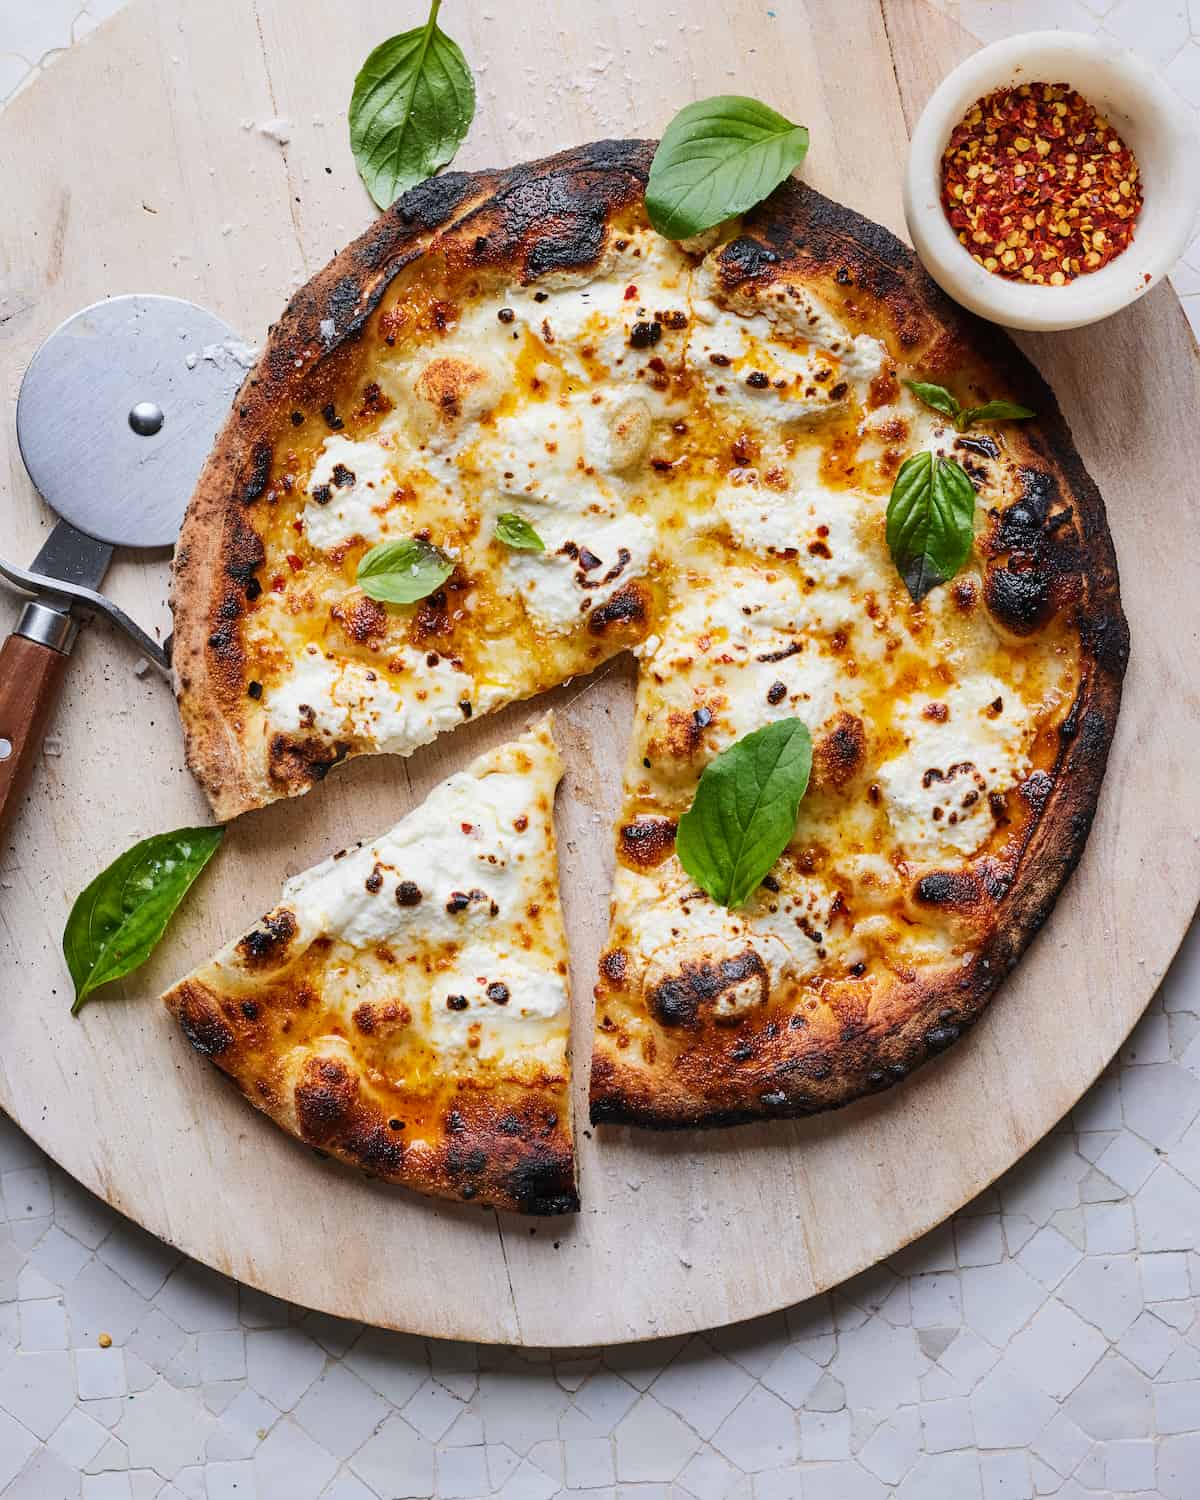 Cooked Pizza Bianca topped with basil leaves on a wooden pizza peel with a pizza cutter to the left of the pizza and red pepper flakes in a white marble bowl